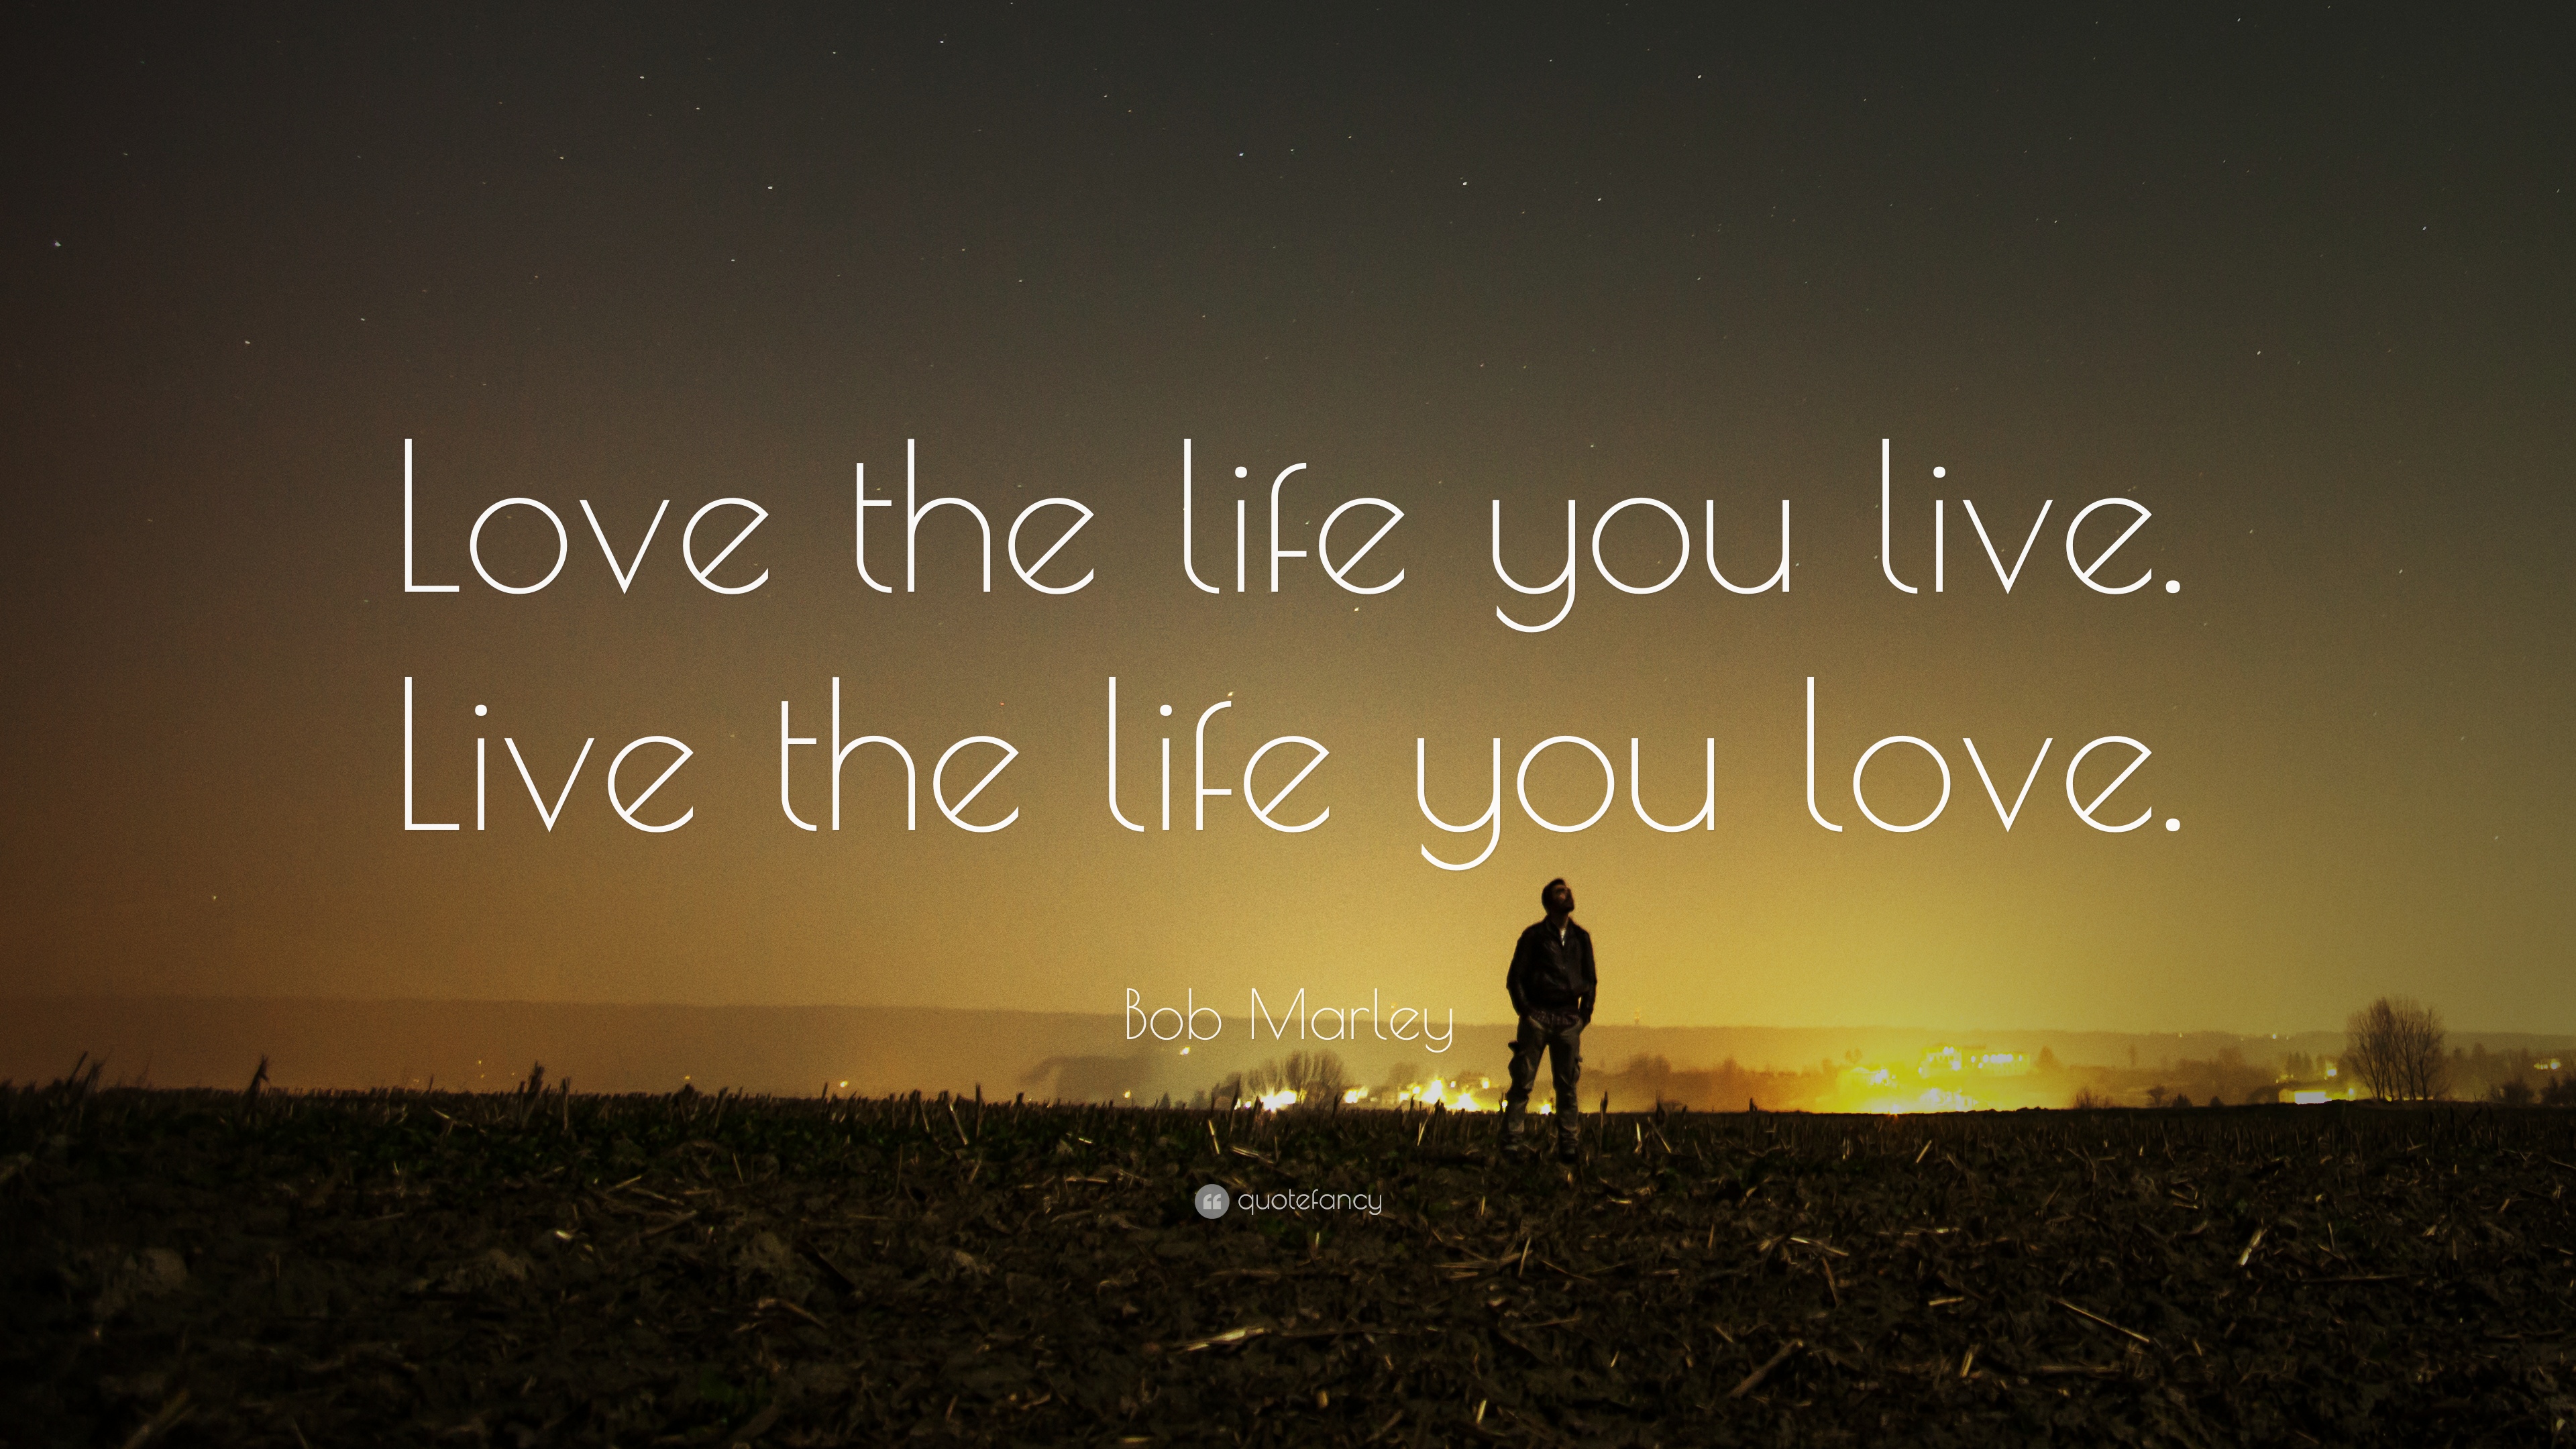 Quotes About Life And Love Wallpapers With Bob Marley - Love The Life You Live Quote , HD Wallpaper & Backgrounds